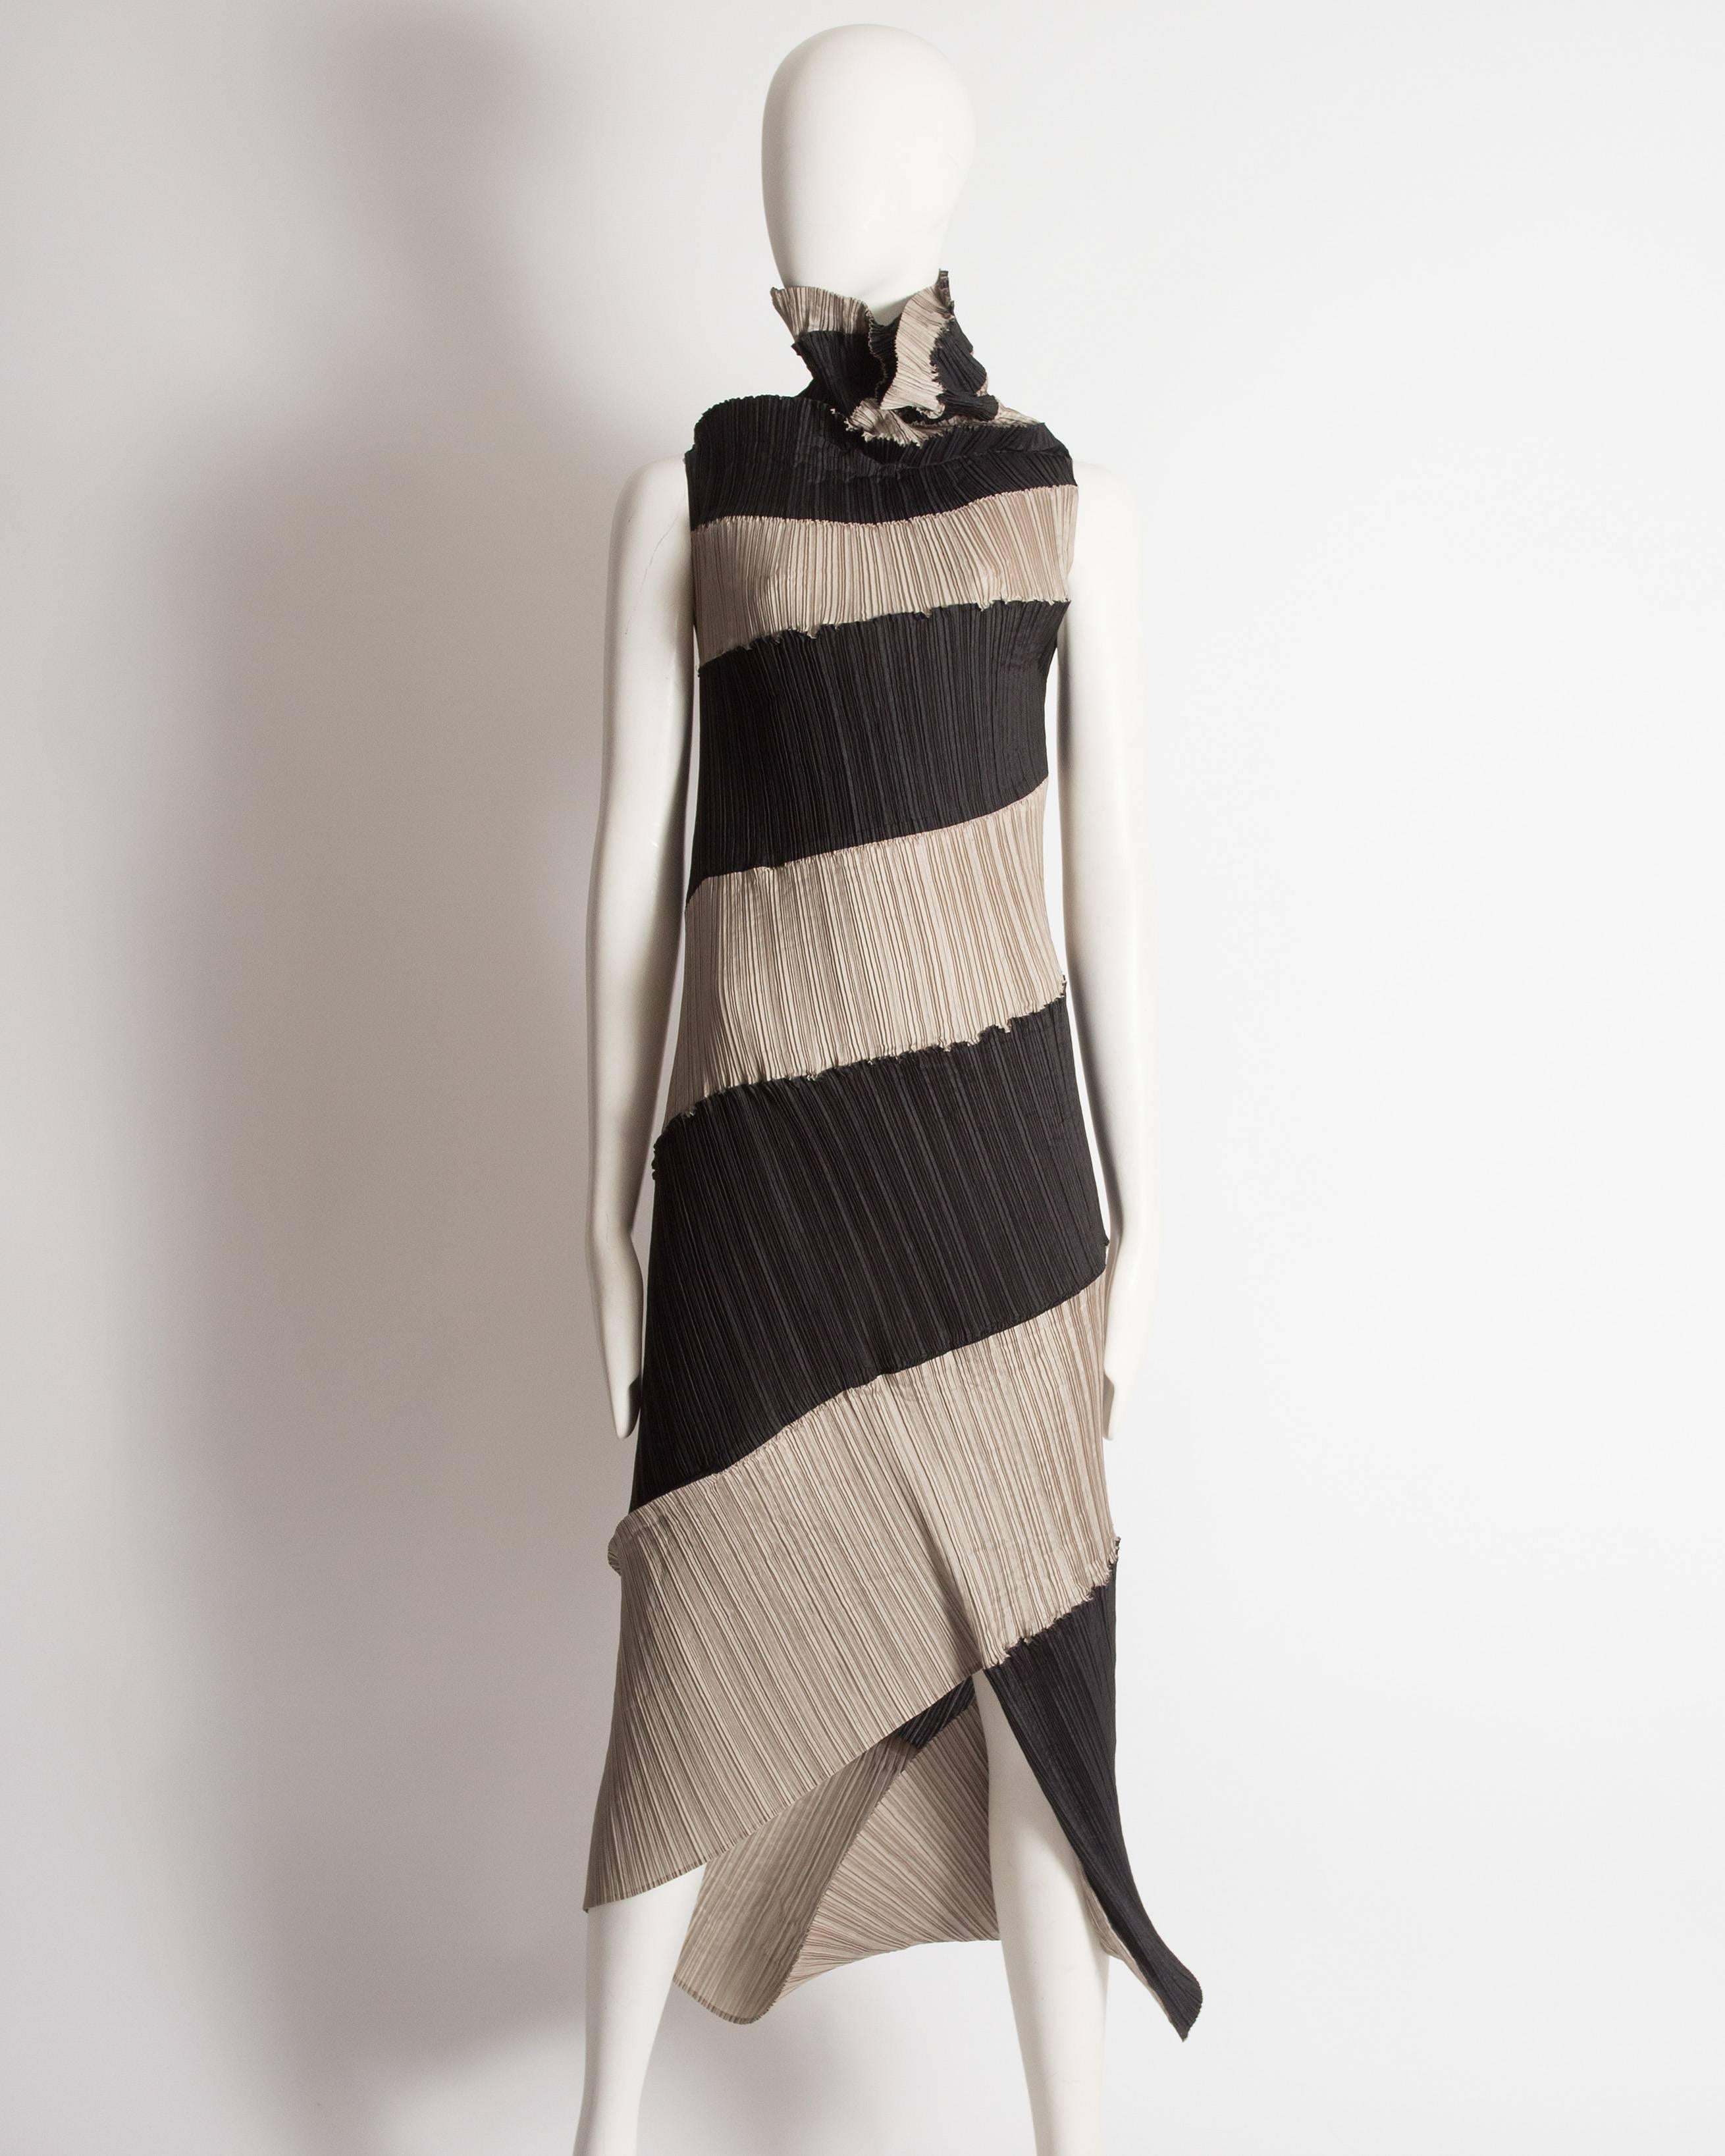 Issey Miyake striped evening dress constructed in gray and black pleated polyester with high cowl neck and an asymmetric hem.

Circa 1990-1999